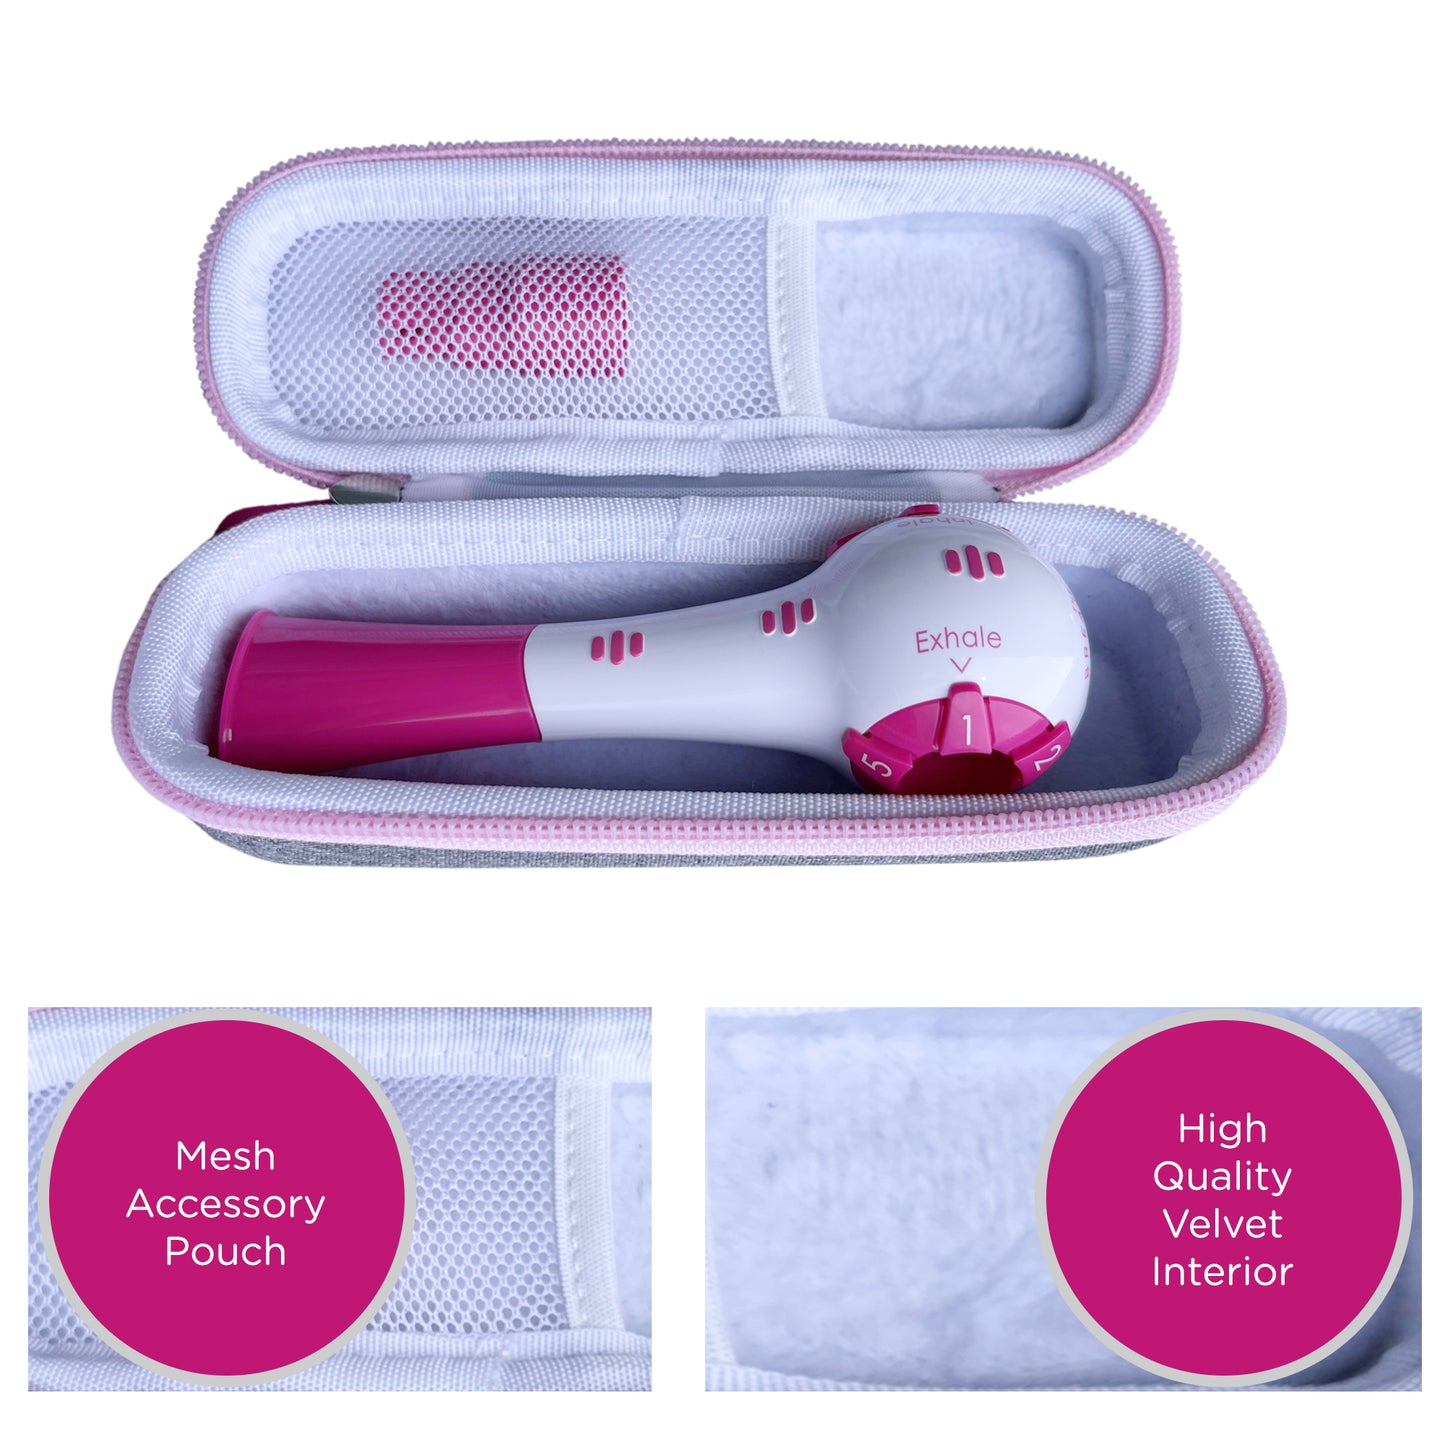 Pink breather case with breather inside.